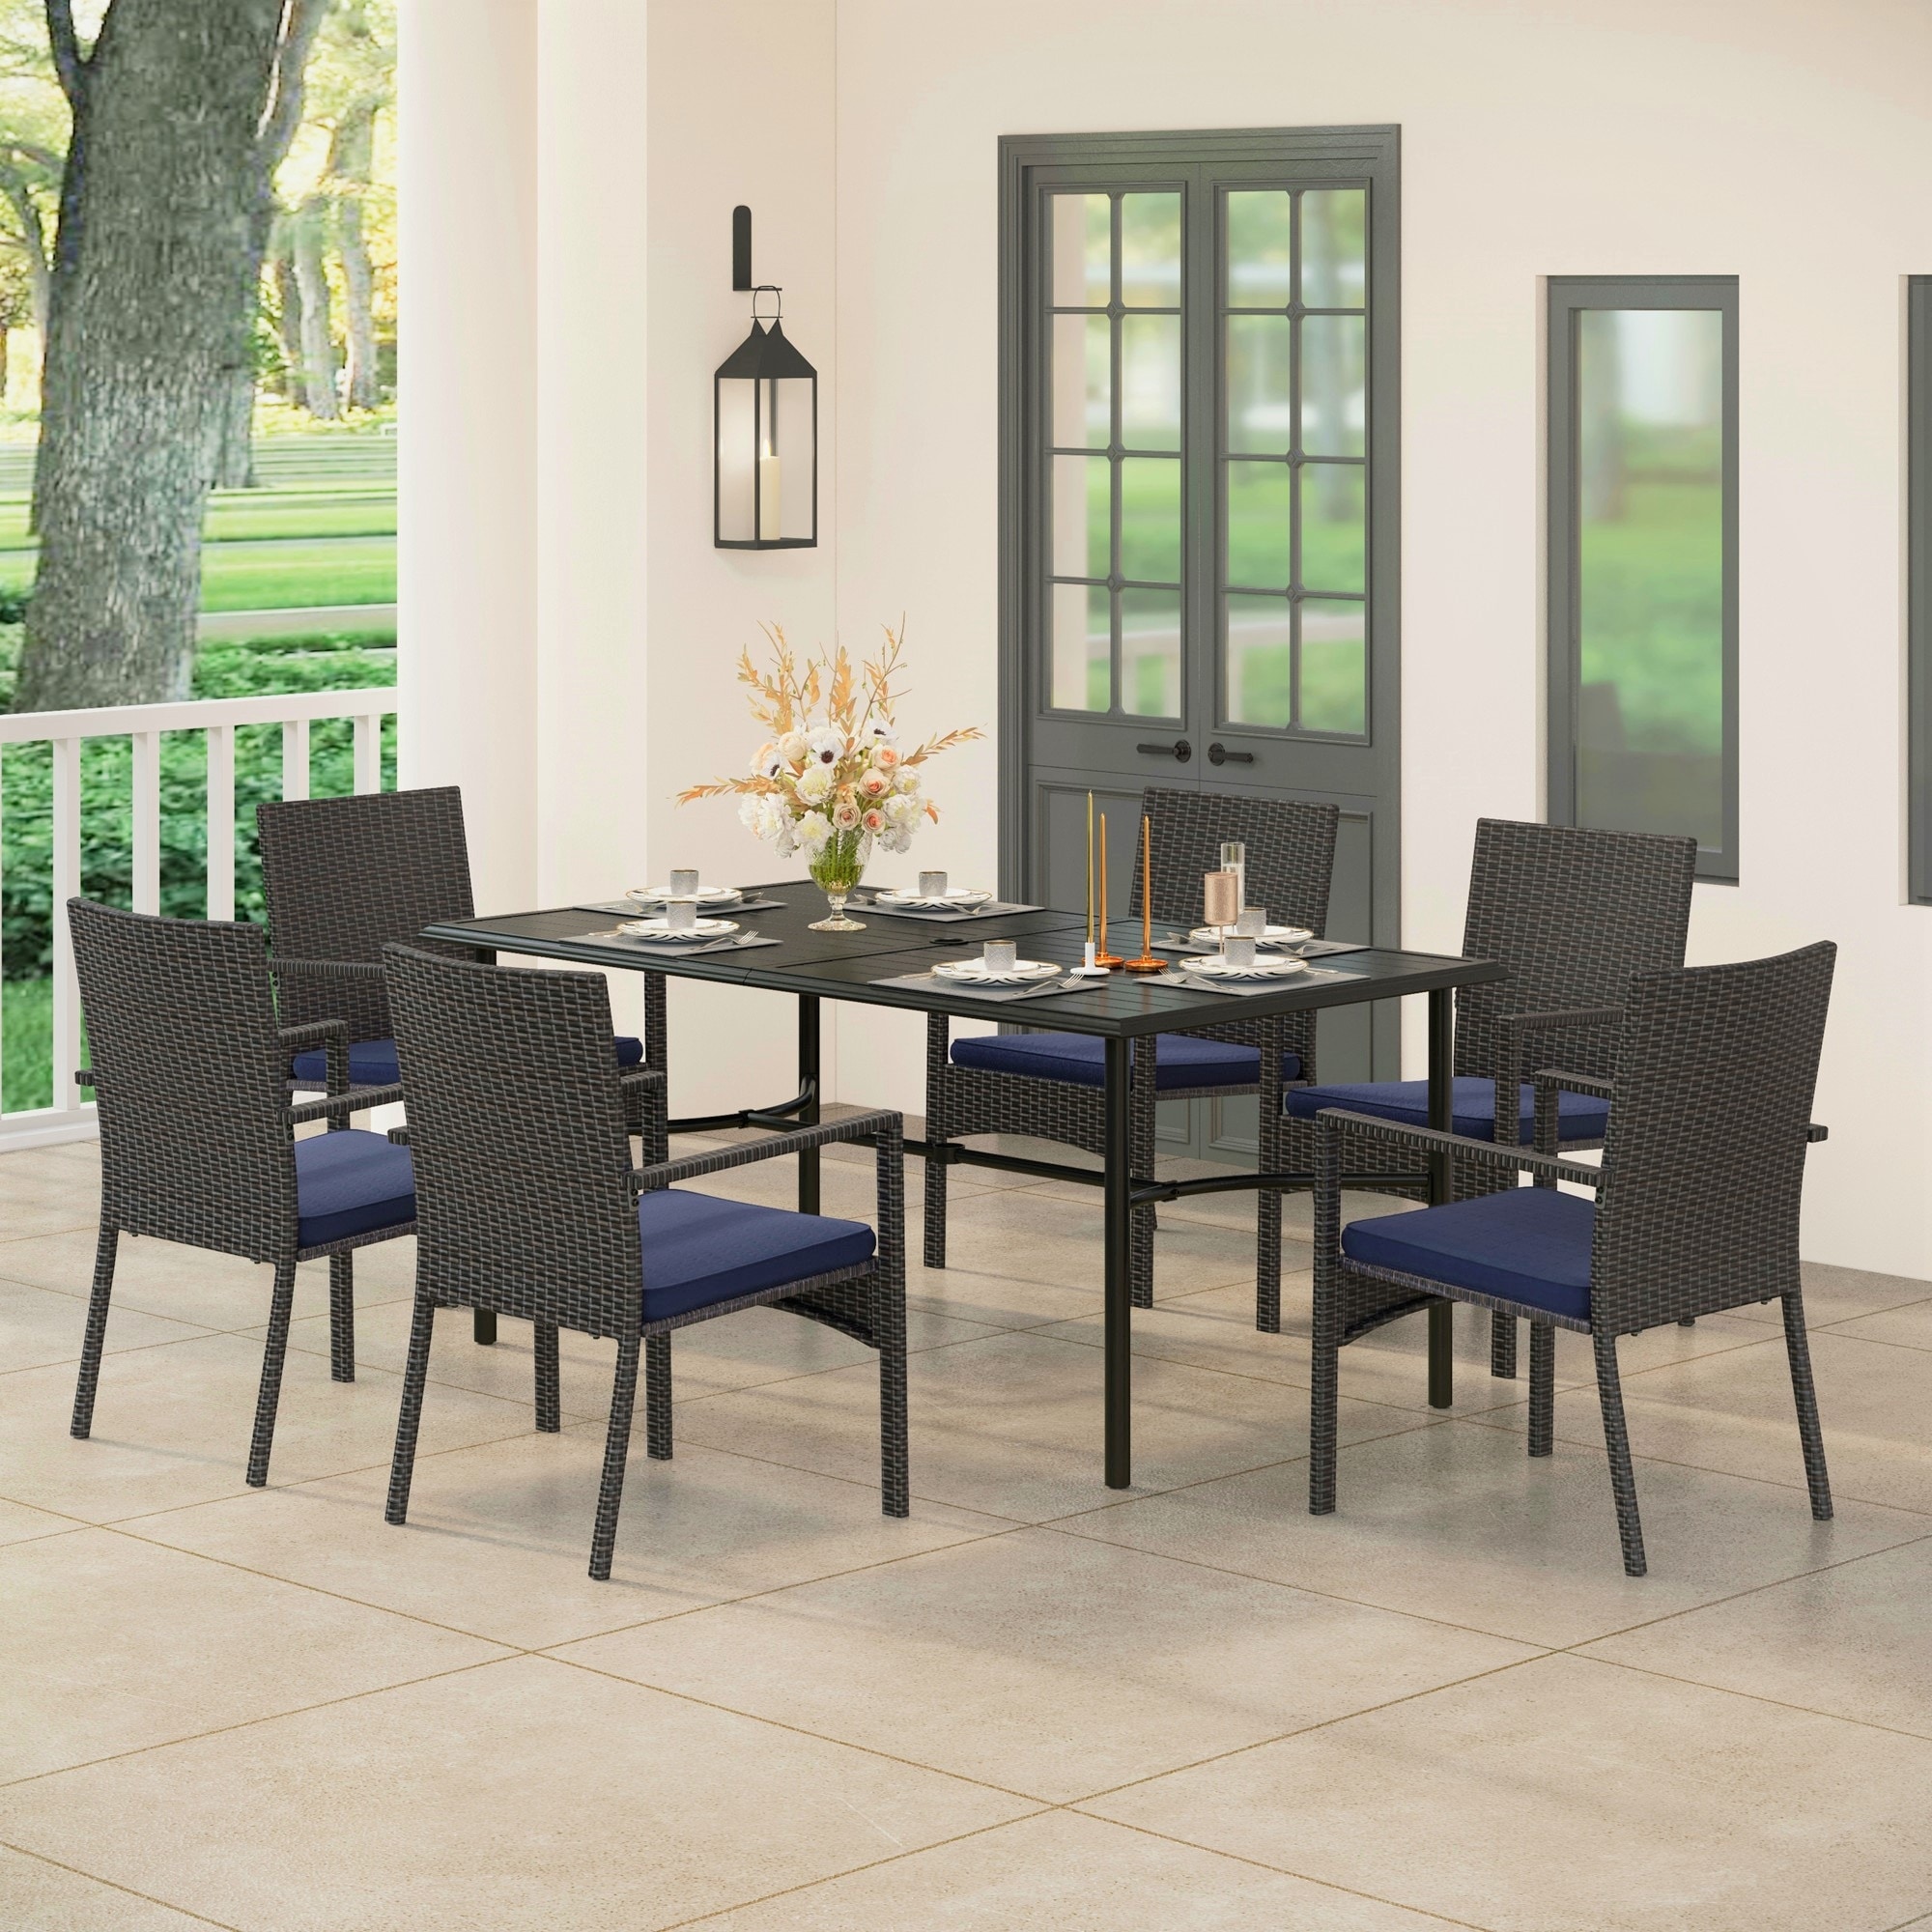 7-piece Patio Dining Set Steel Rectangle Table and Rattan Dining Chairs